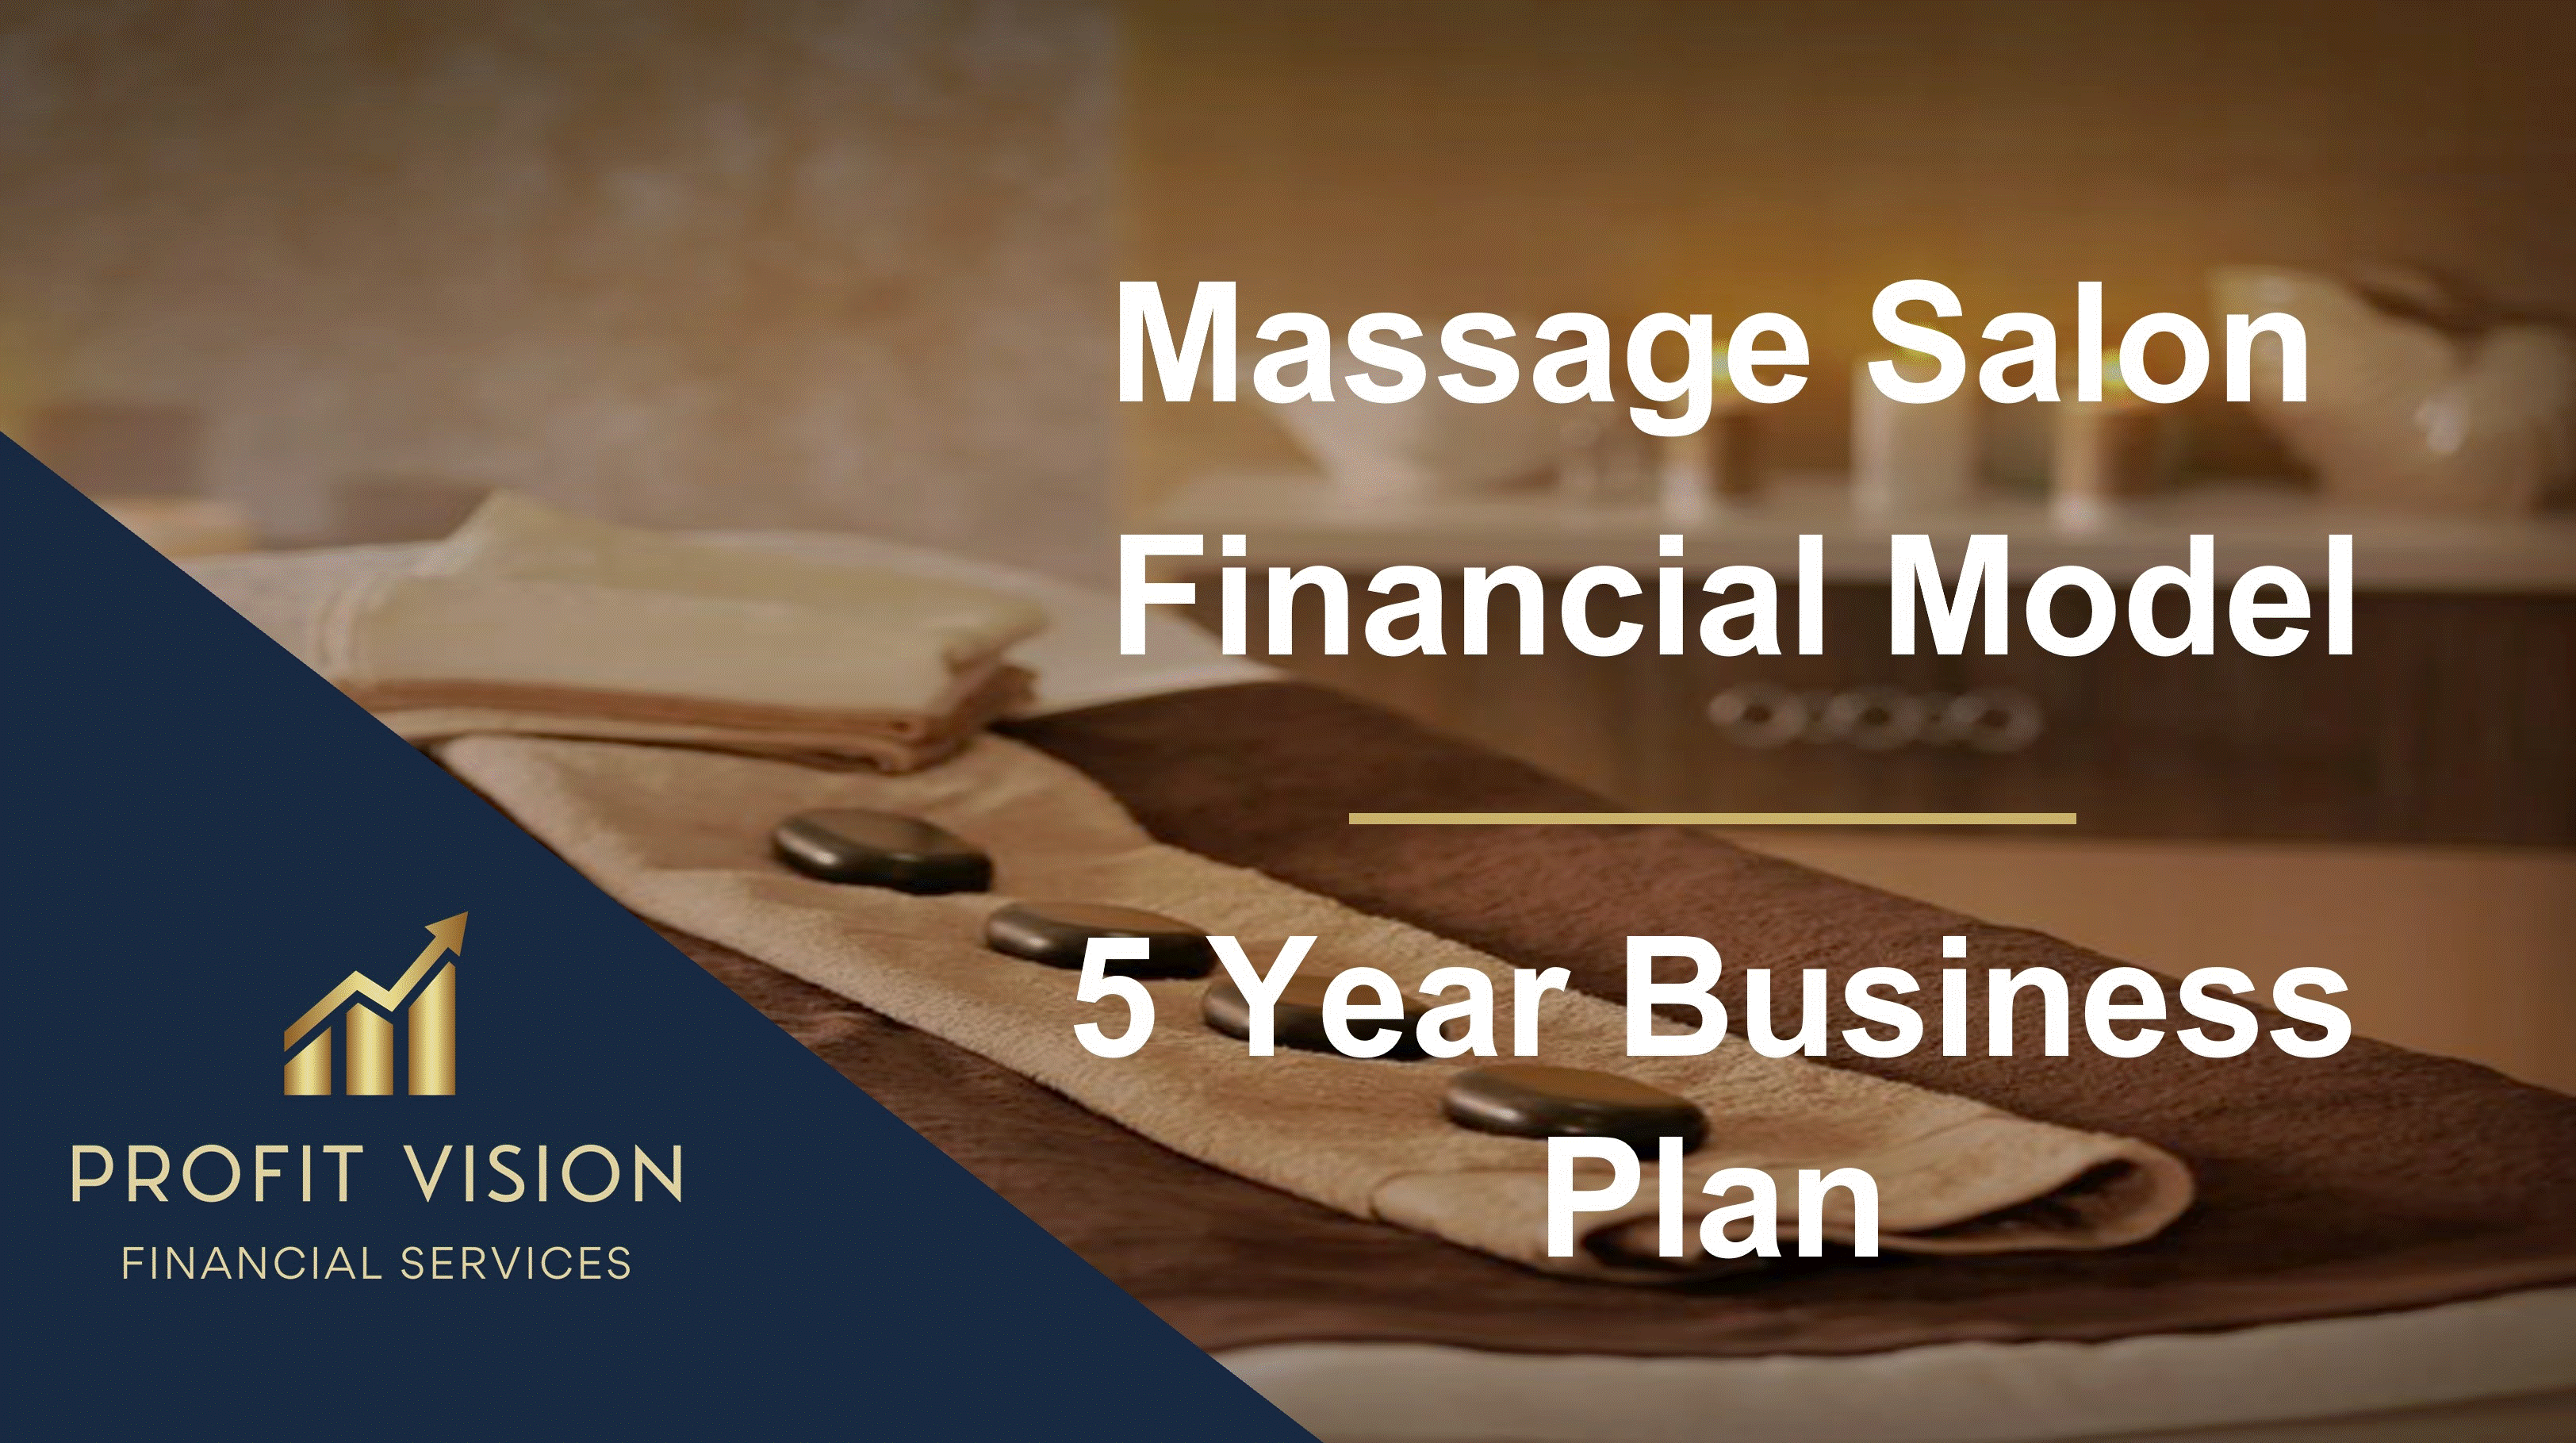 This is a partial preview of Massage Salon Financial Model - 5 Year Business Plan. 